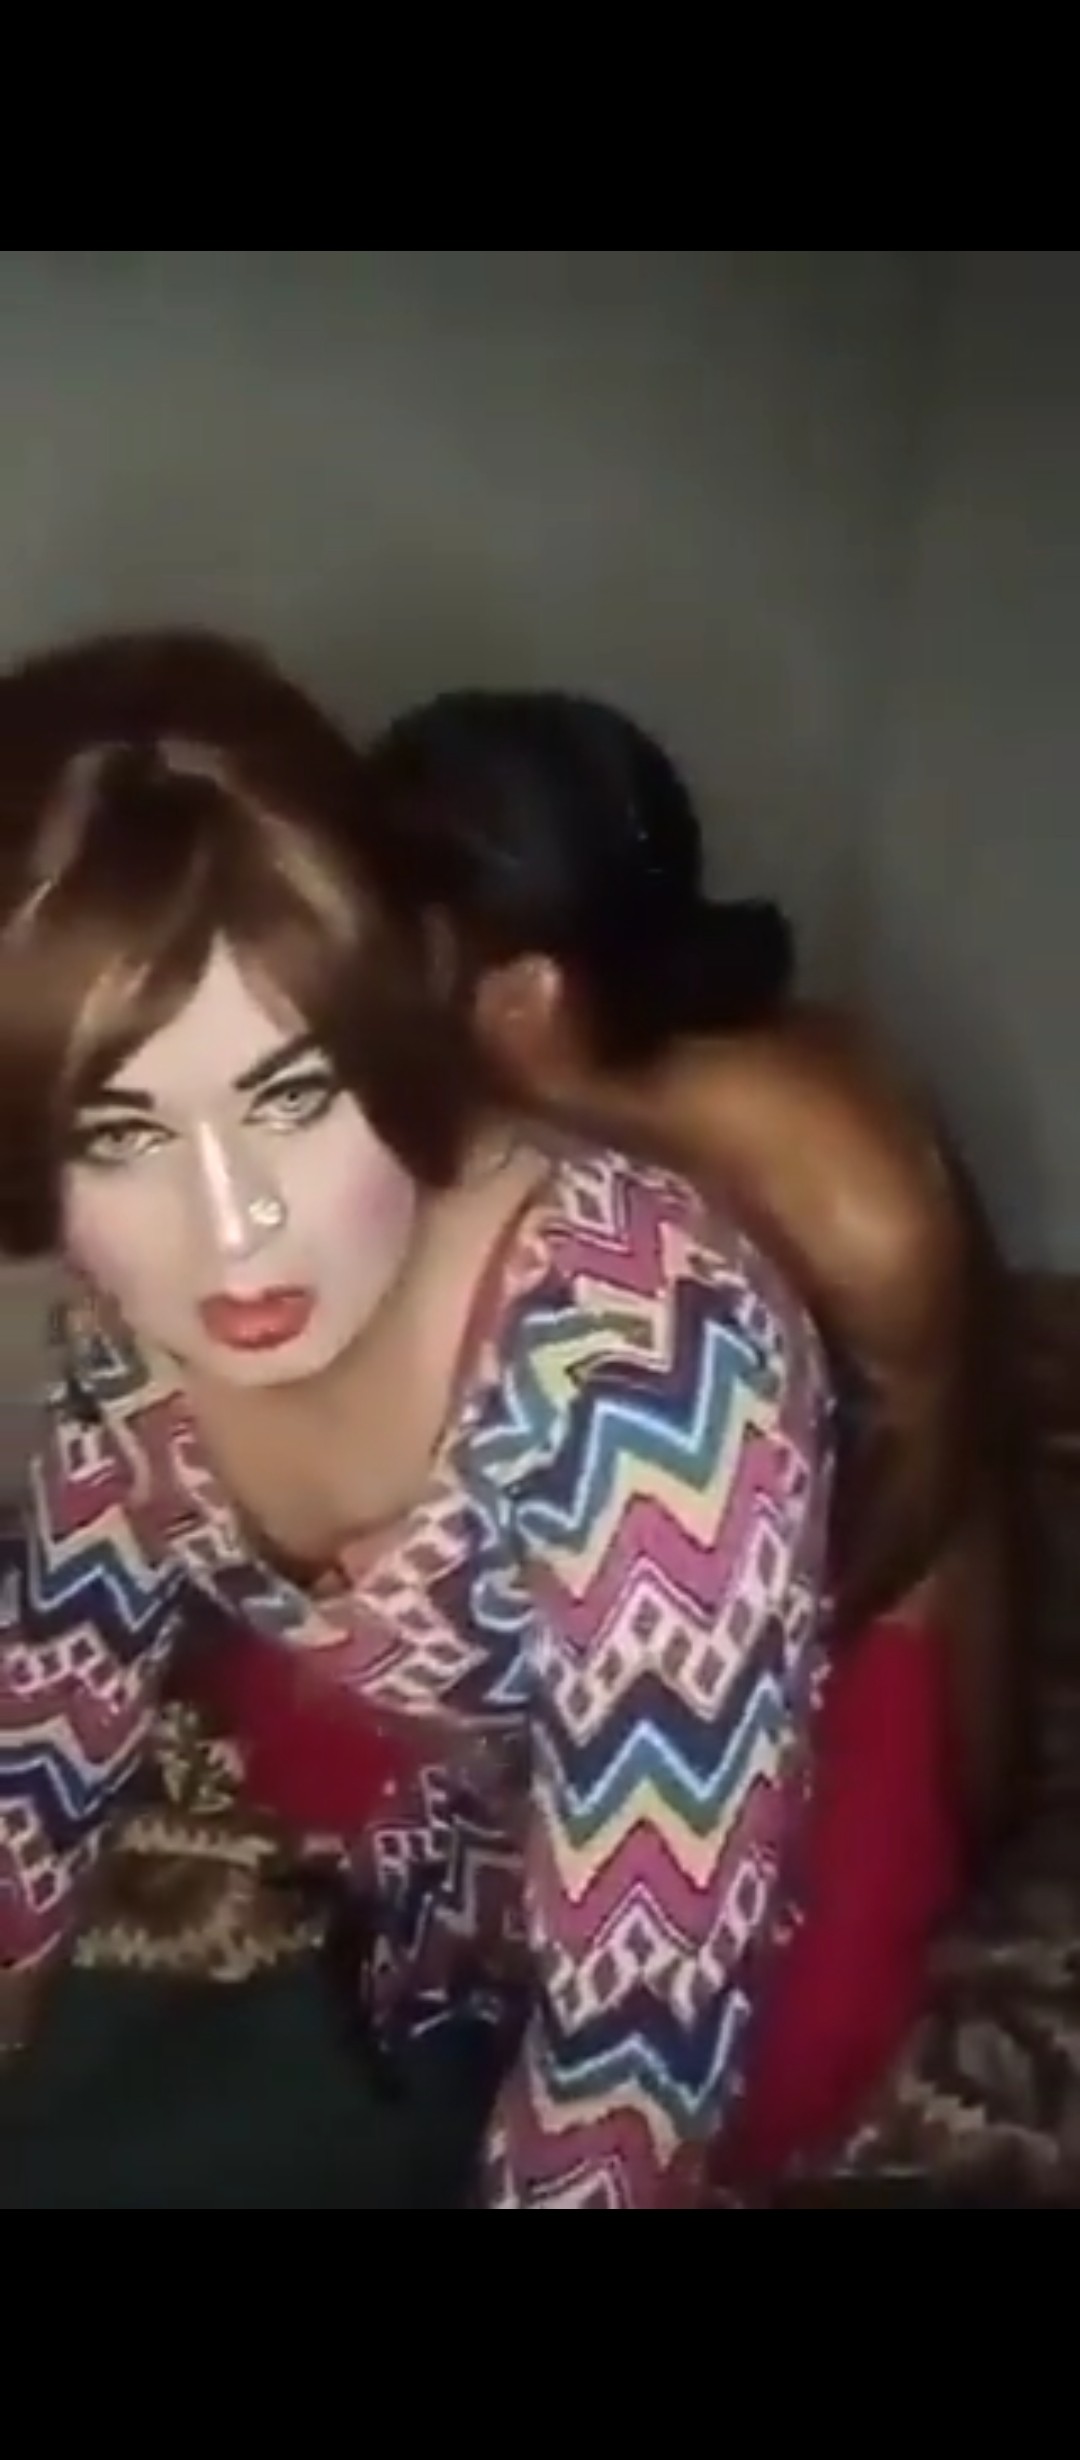 Paki hijra getting fucked - Trans Porn Videos Section - DropMMS